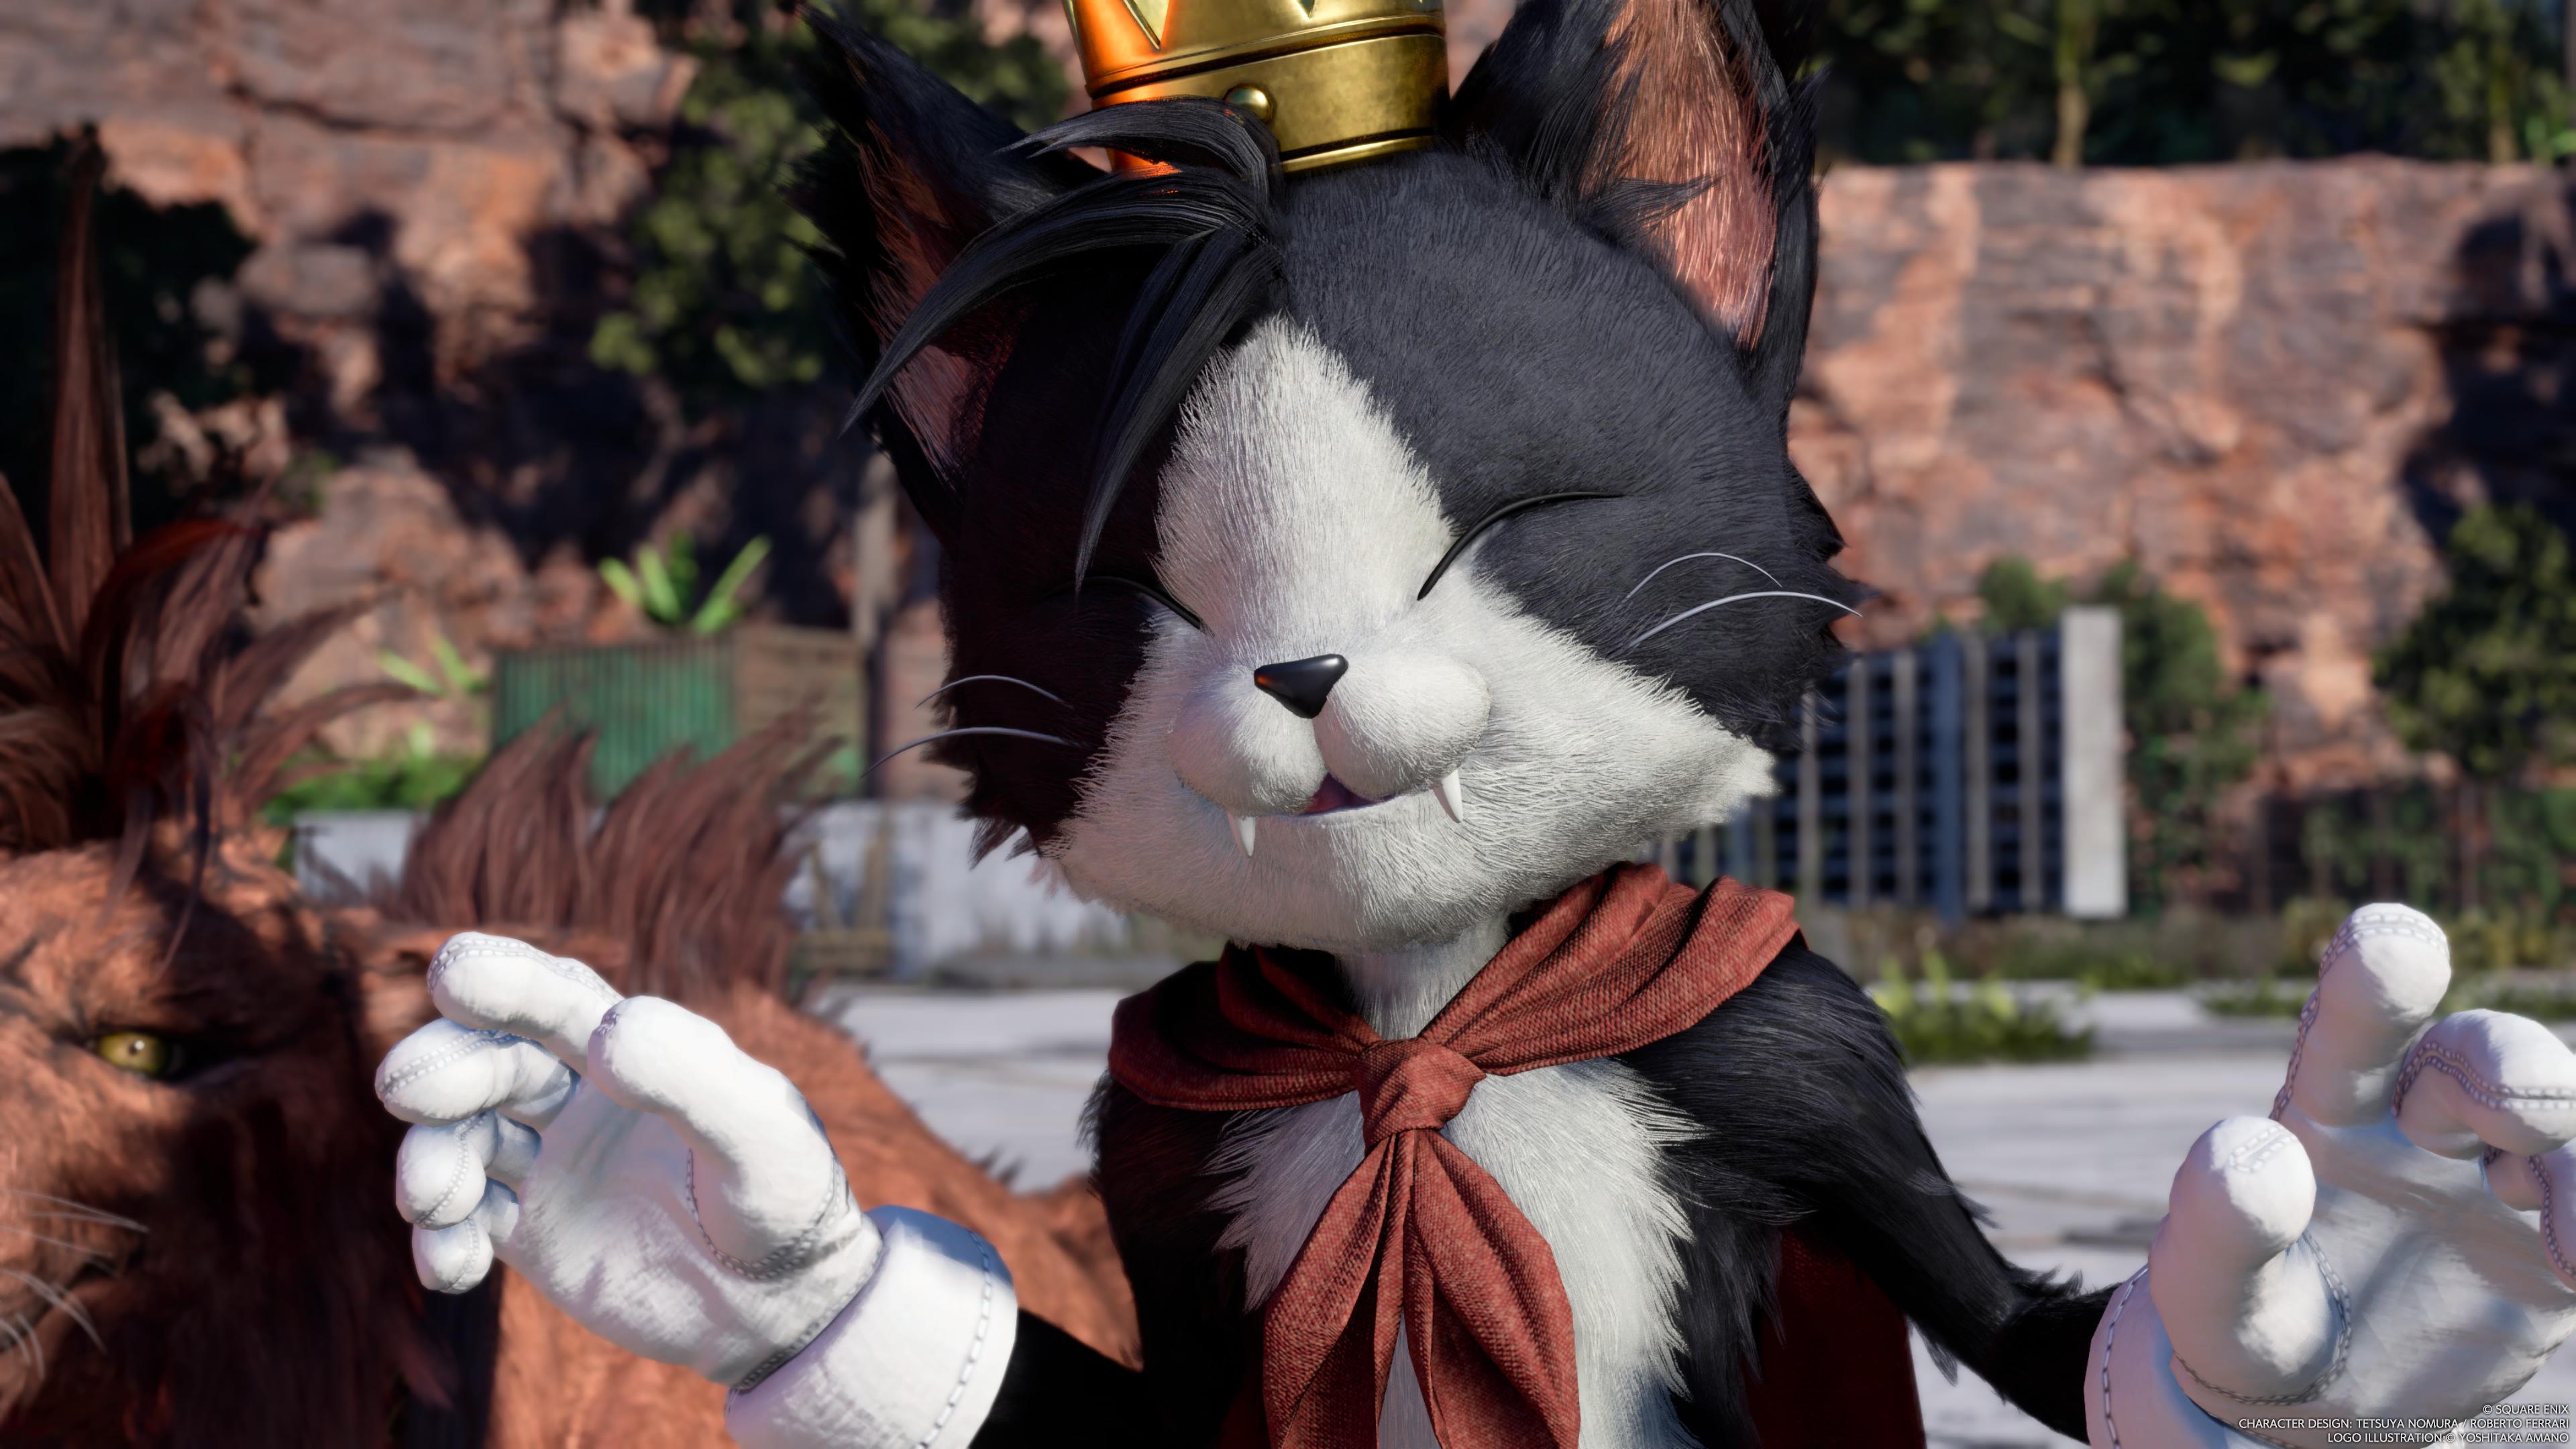 General 3840x2160 Final Fantasy VII: Rebirth Cait Sith Final Fantasy Square Enix video games video game characters CGI video game art screen shot creature whiskers closed eyes white gloves gloves fangs fur crown blurry background watermarked neckerchief